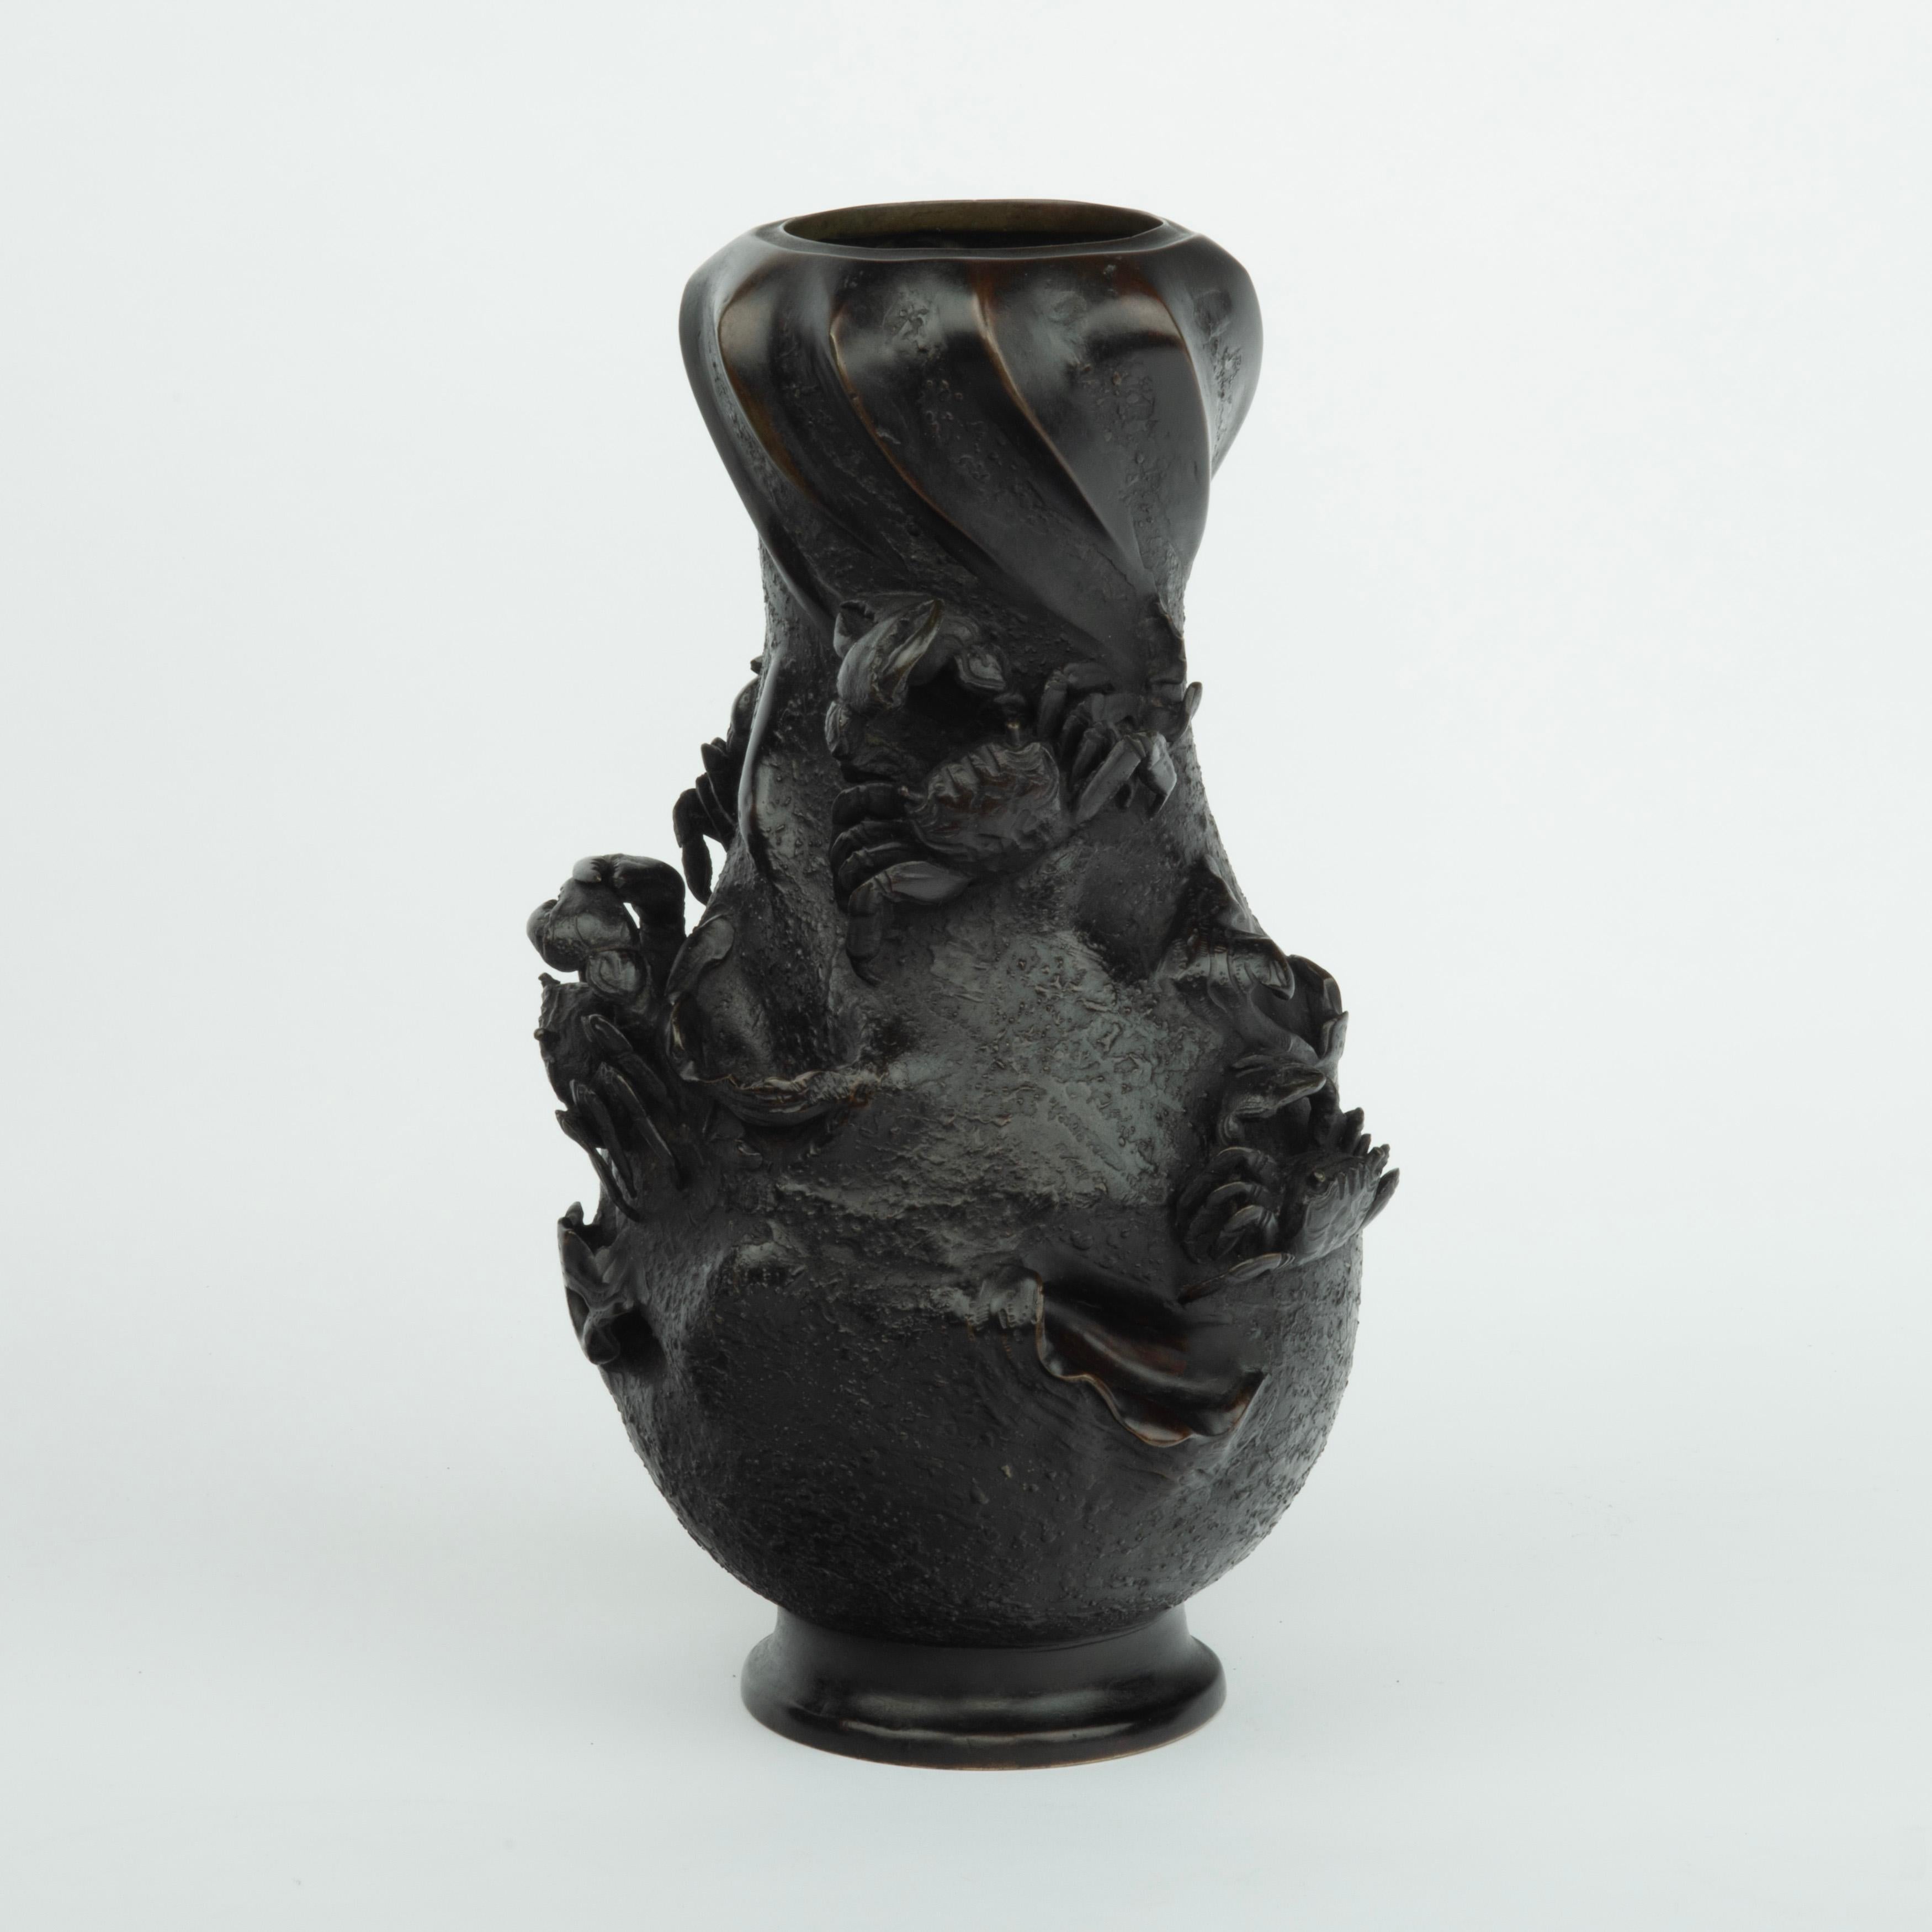 A Meiji bronze vase by Nobuhira, of baluster shape with a spirally twisted neck, the body decorated with four high relief crabs and several partially exposed open clam shells on a textured ground.  Stamped ‘Nobuhira 信平’.  Japanese, circa 1890.
